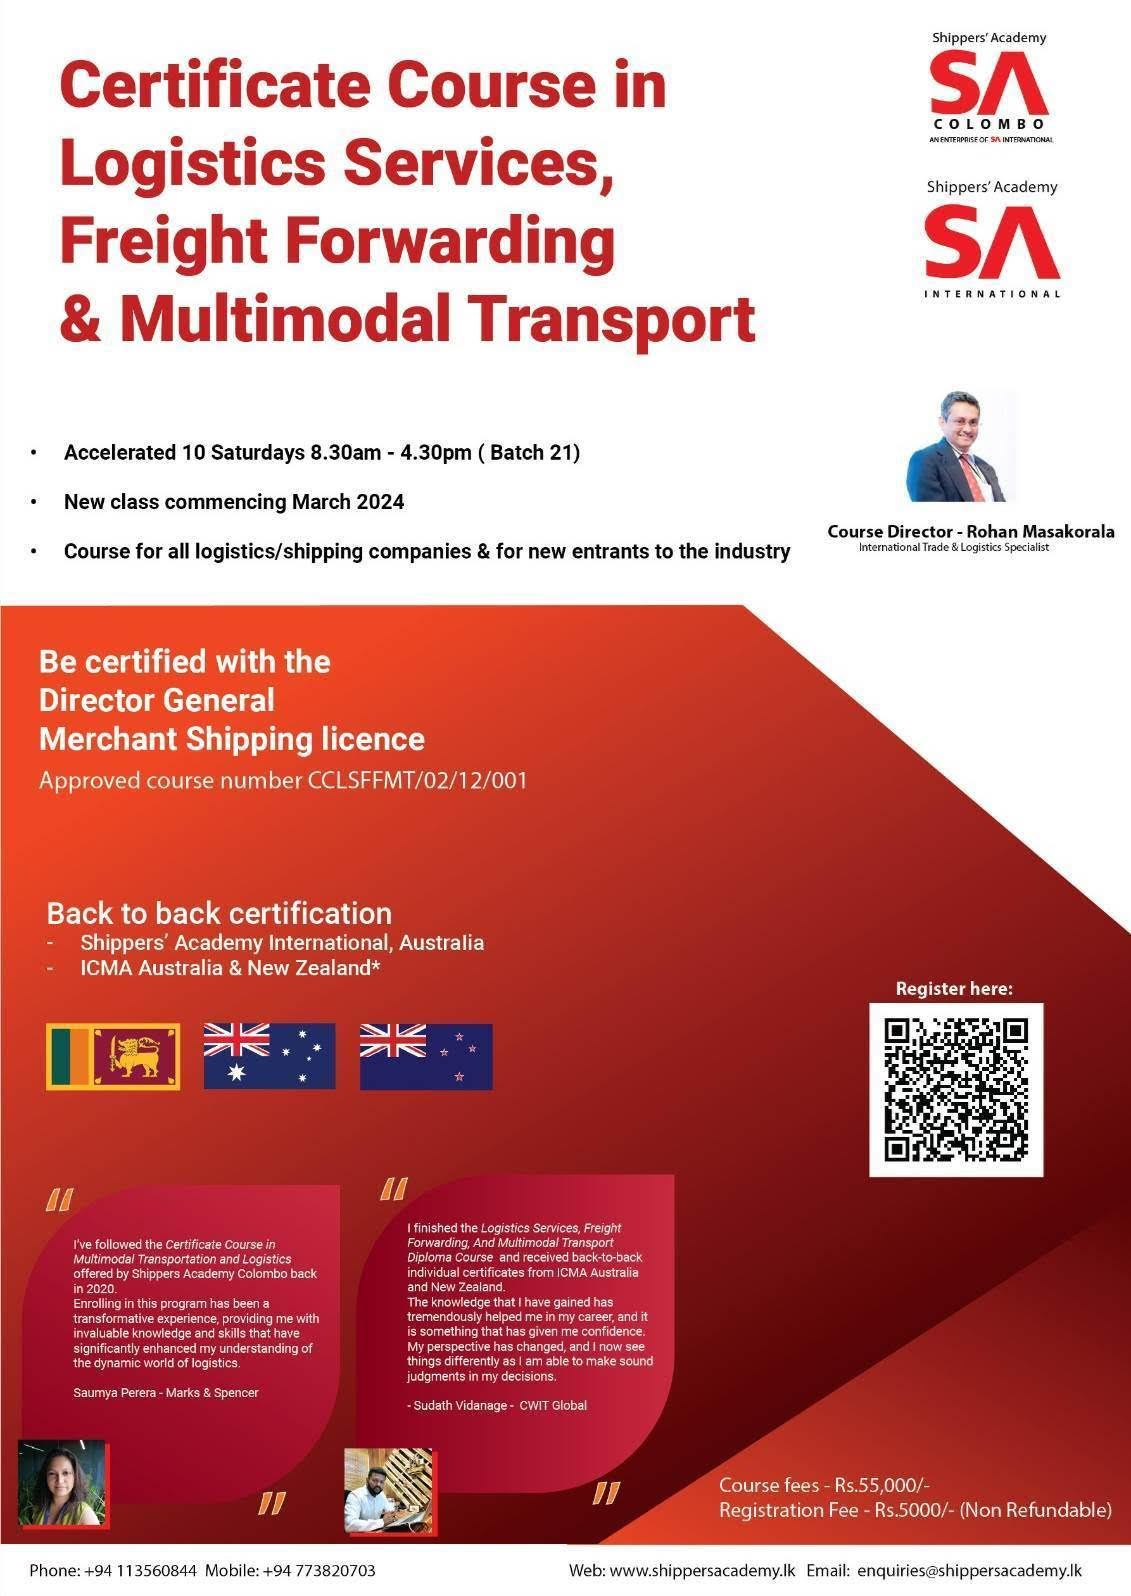 DMS certified Certificate Course in Logistics Services, Freight Forwarding & Multimodal Transport